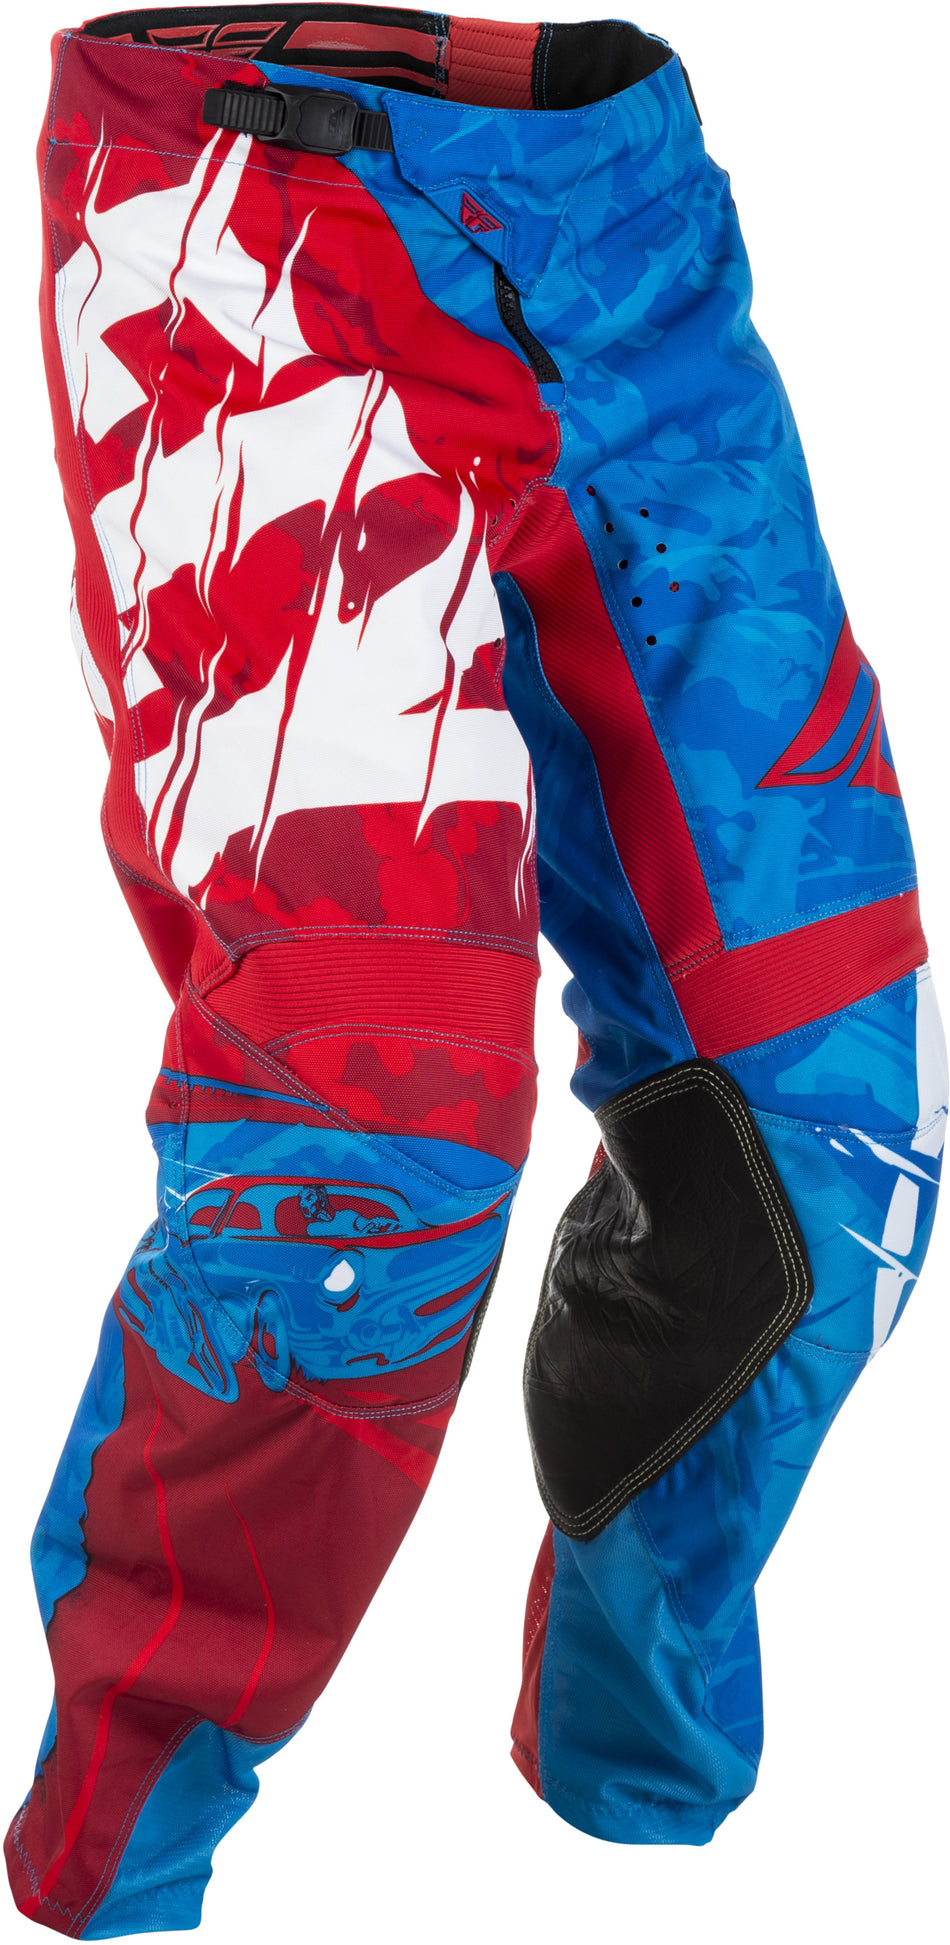 FLY RACING Kinetic Outlaw Pants Red/Blue Sz 28s 371-53228S